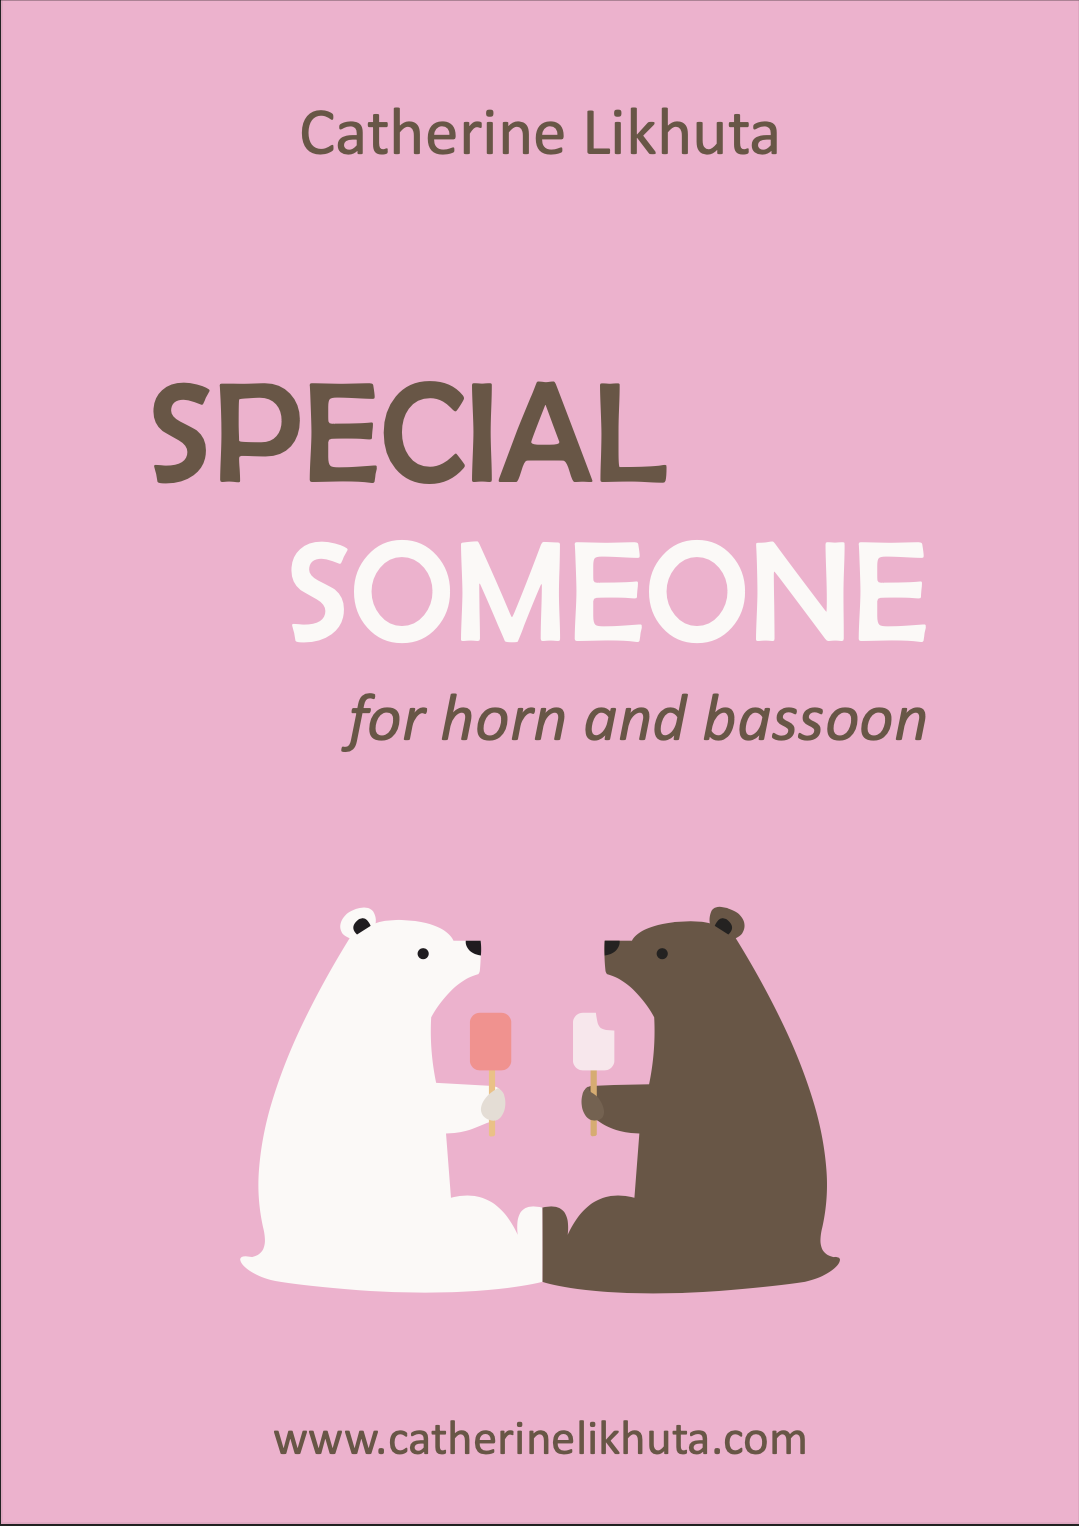 Special Someone (Horn And Bassoon Version) by Catherine Likhuta